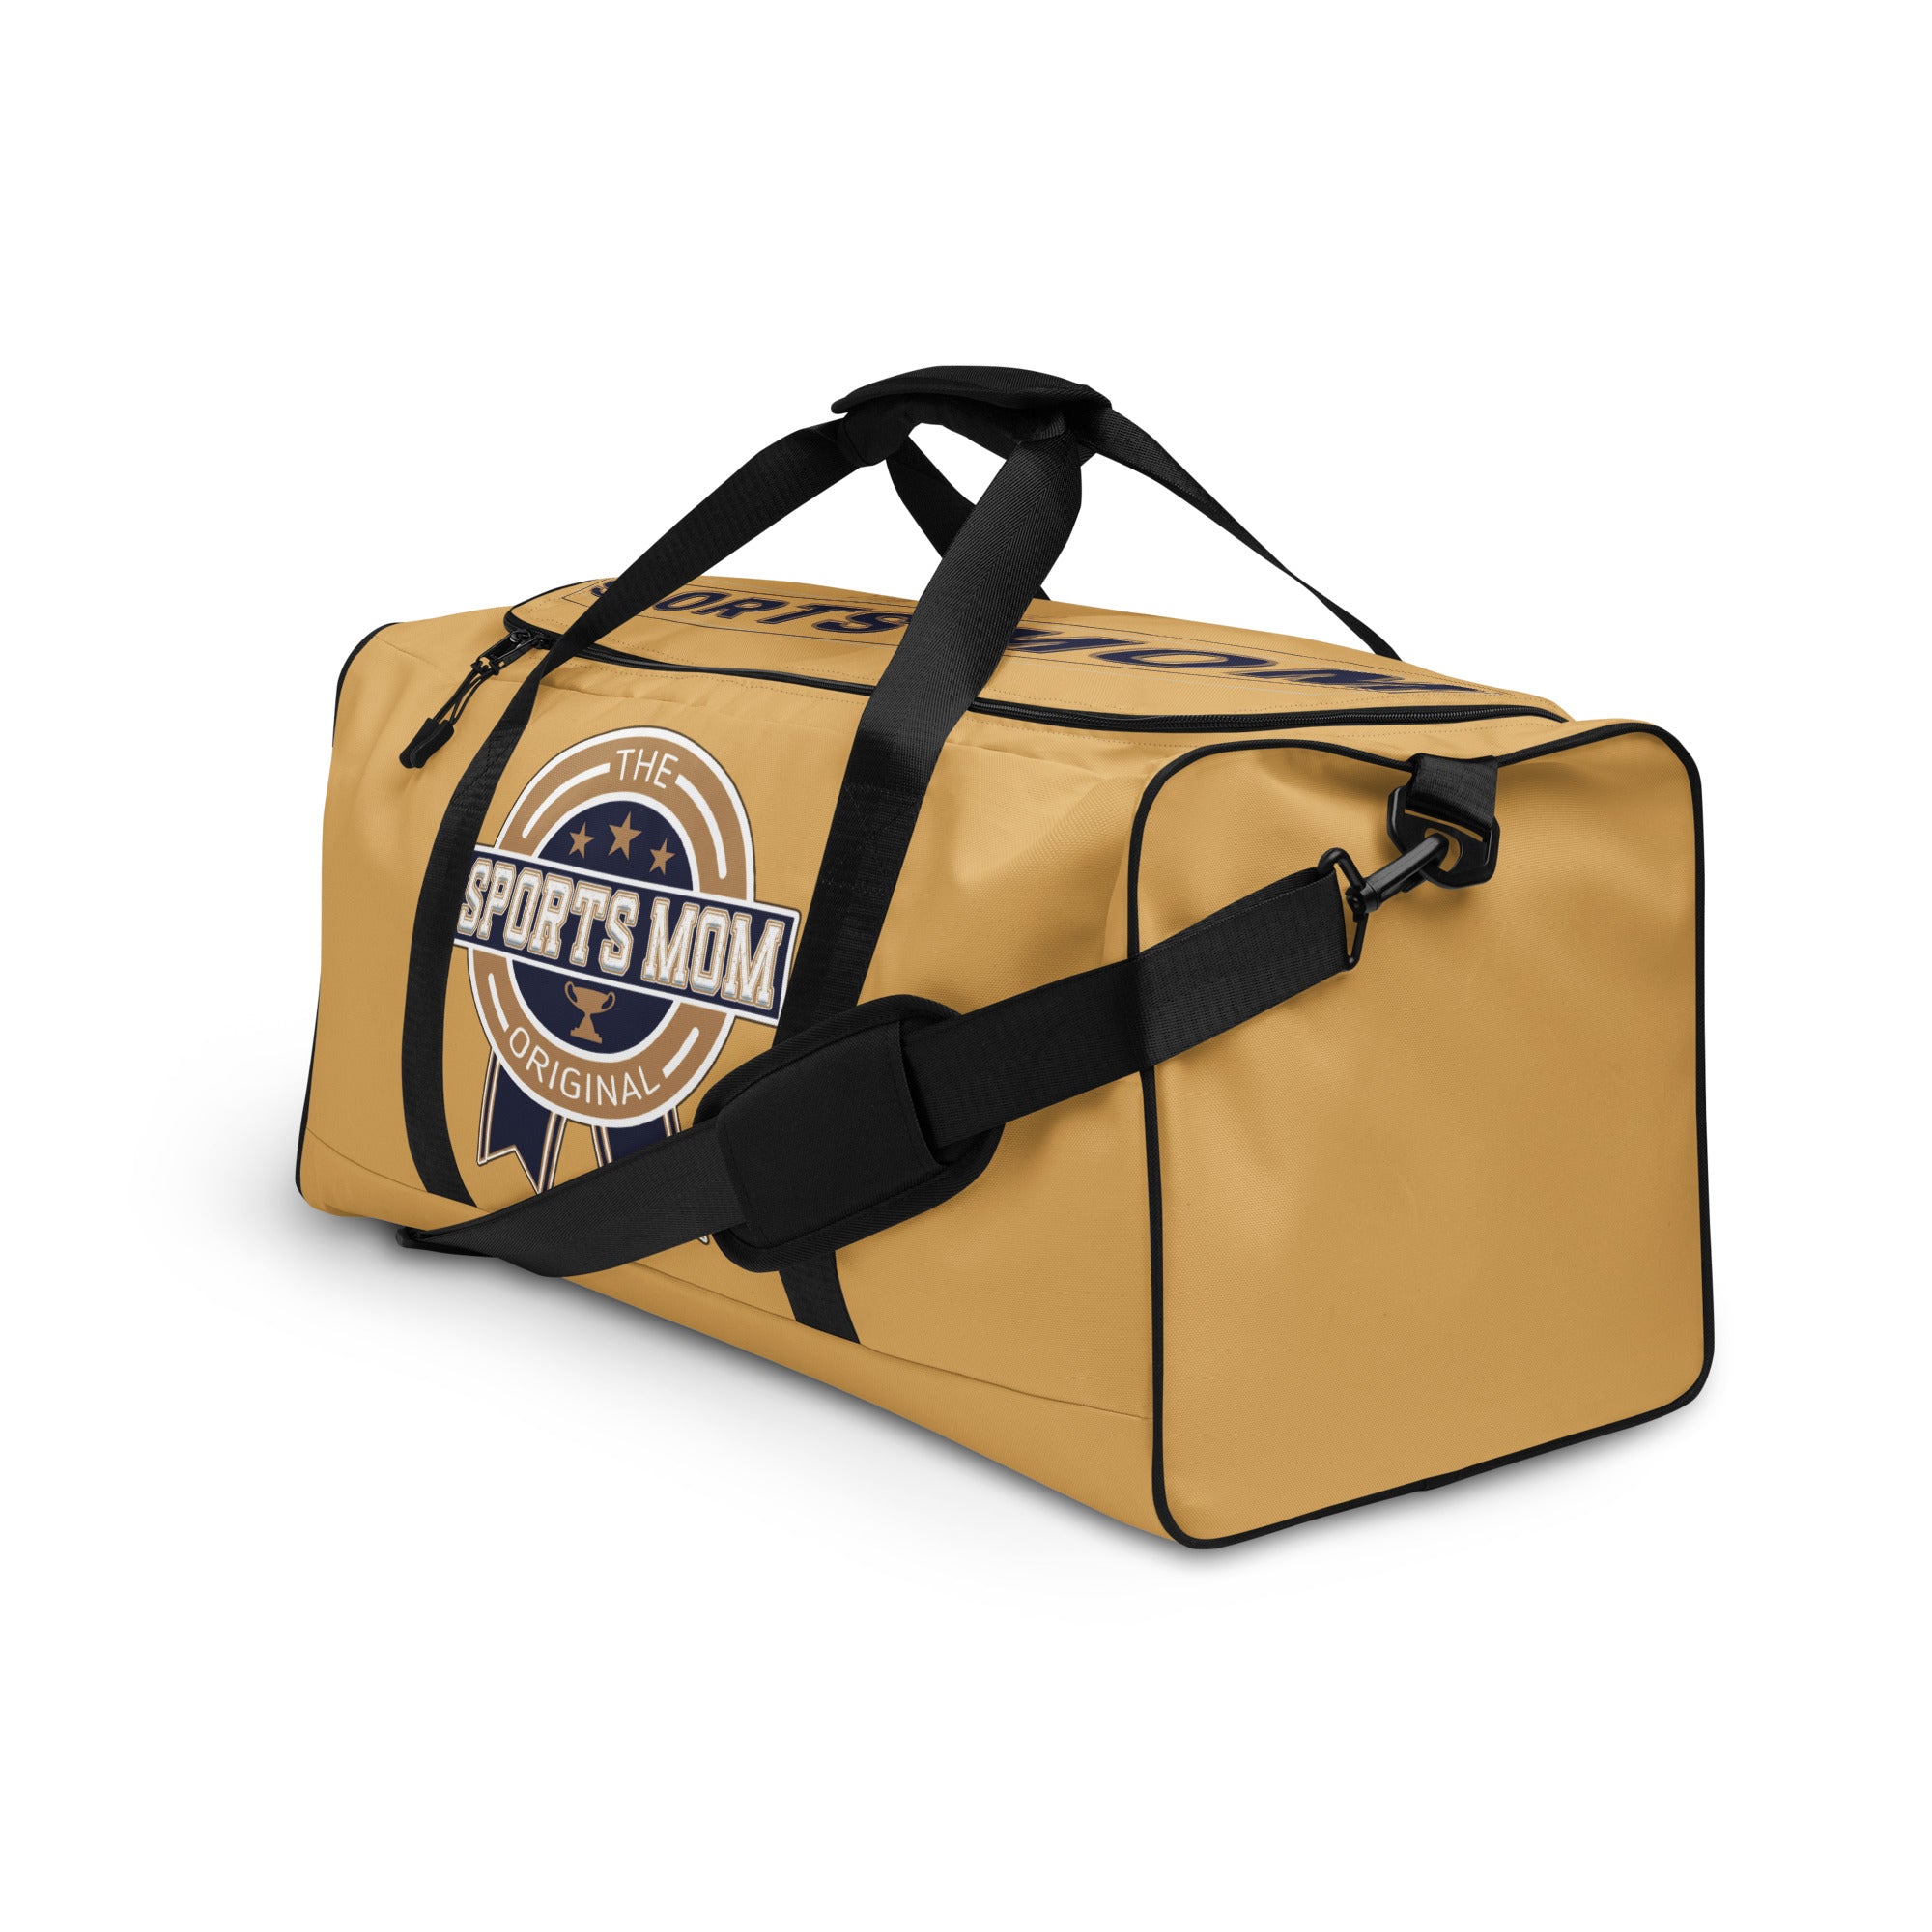 Sports Mom - Away Game - Ultimate Duffle Bag - Fawn